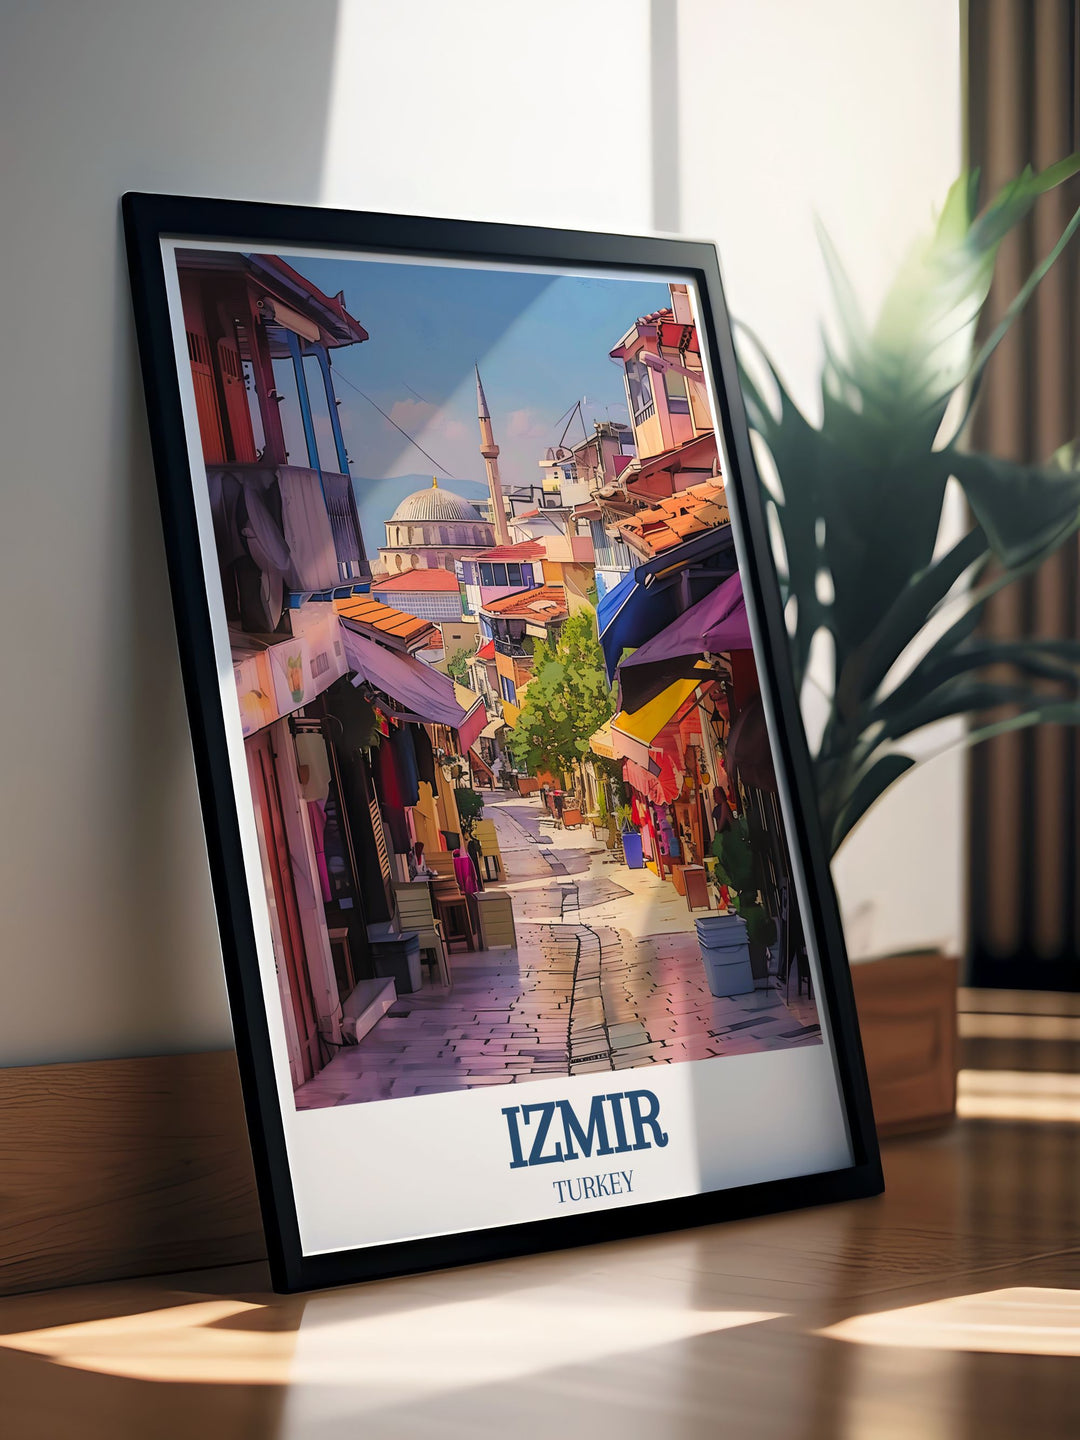 Highlighting the lively atmosphere of Kemeralti Bazaar and the historical significance of Başdurak Mosque, this travel poster is perfect for adding a touch of Turkeys heritage to your space.